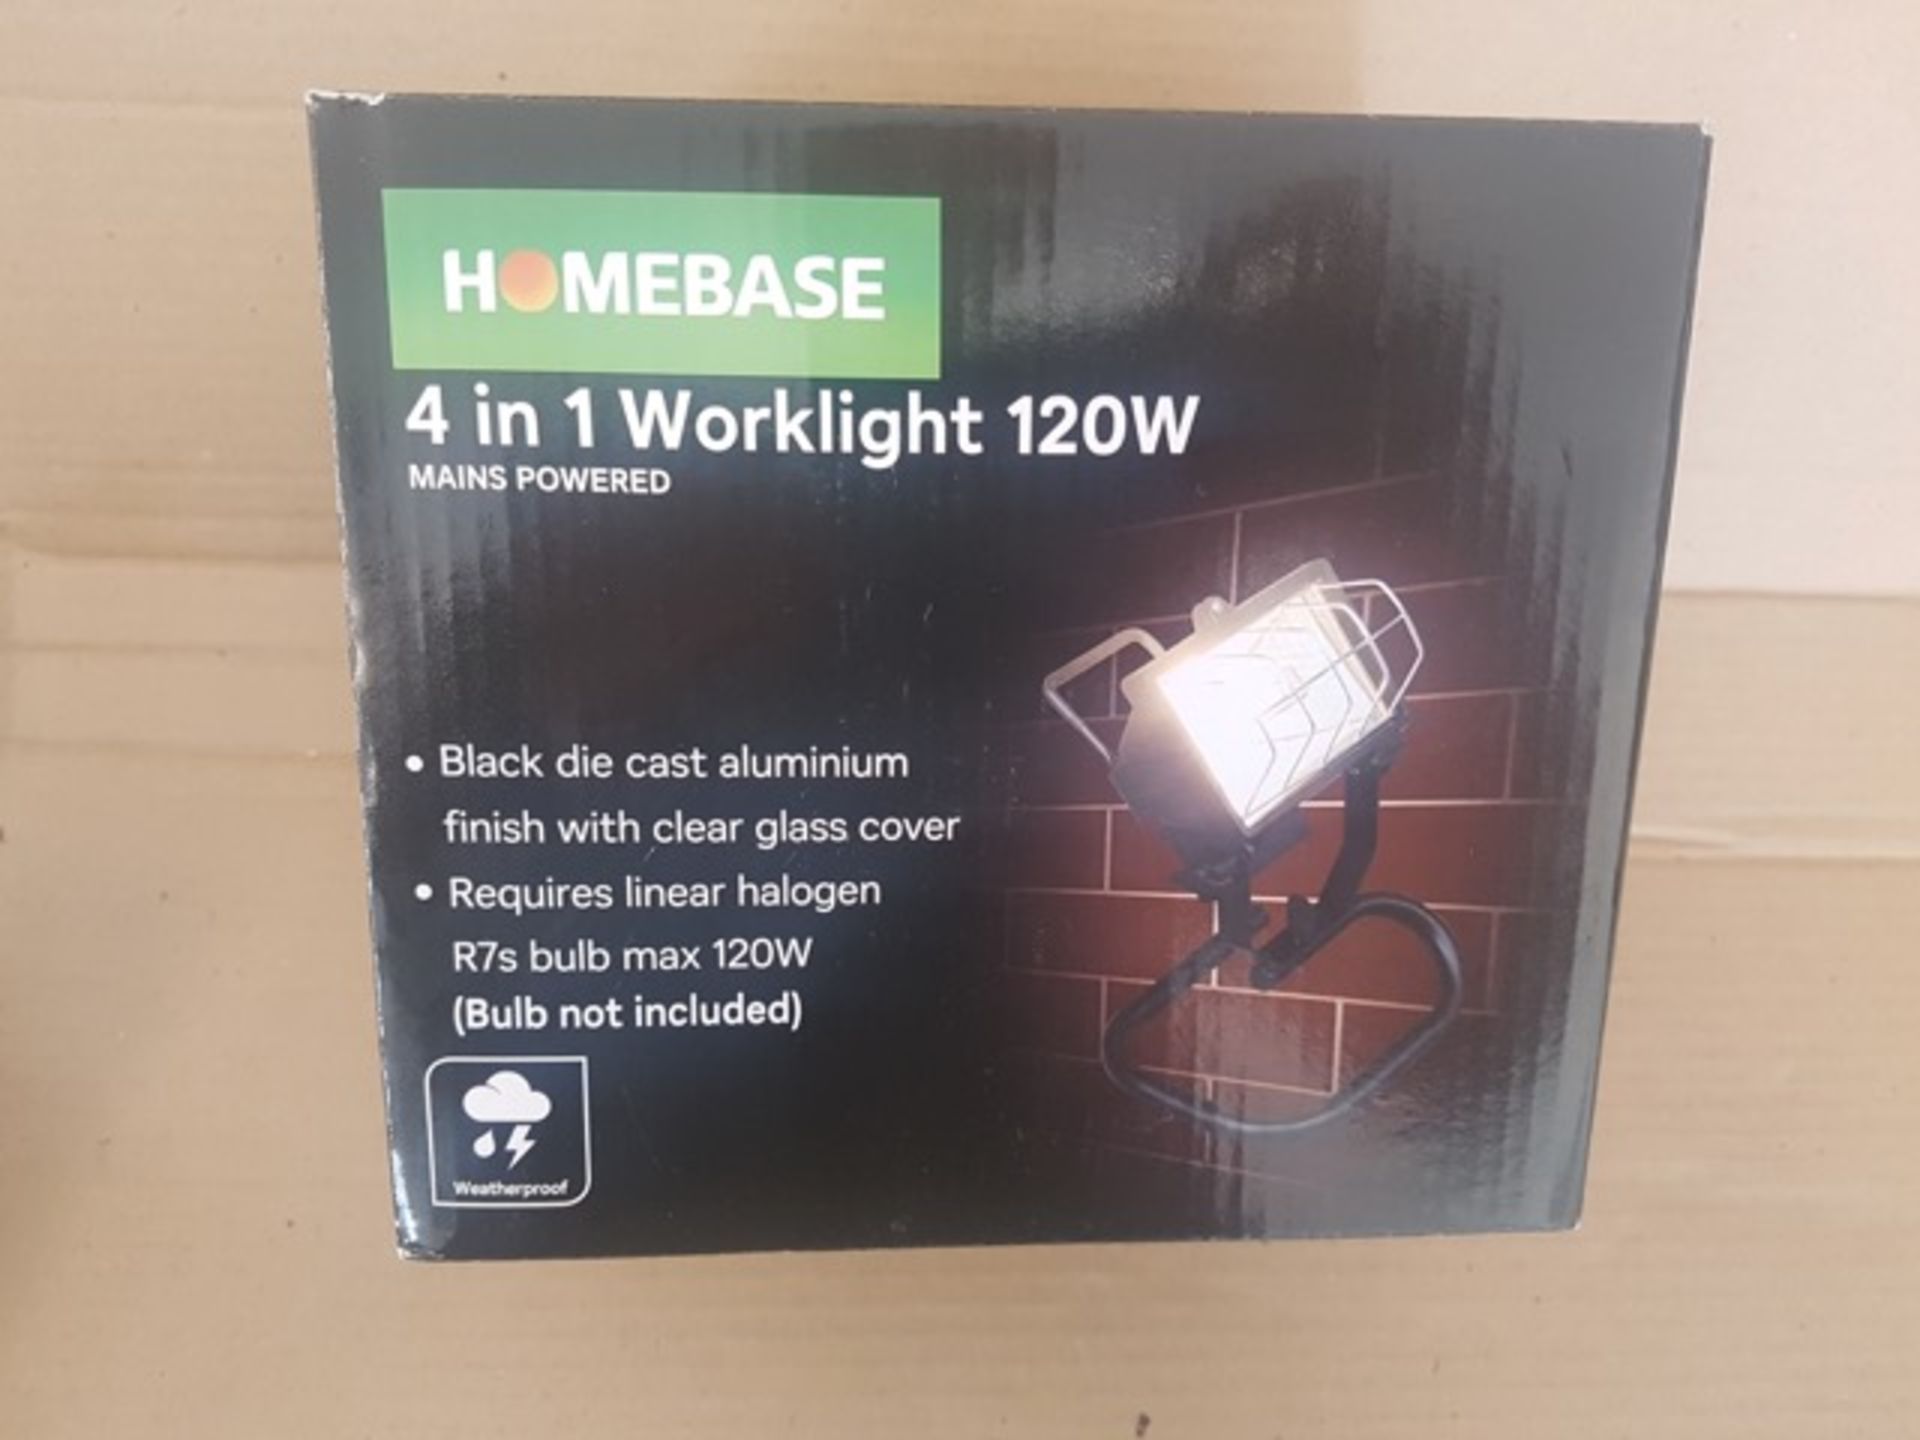 PALLET TO CONTAIN 180 x Brand New 120W 4 in 1 Mains Powered Weatherproof Worklight's